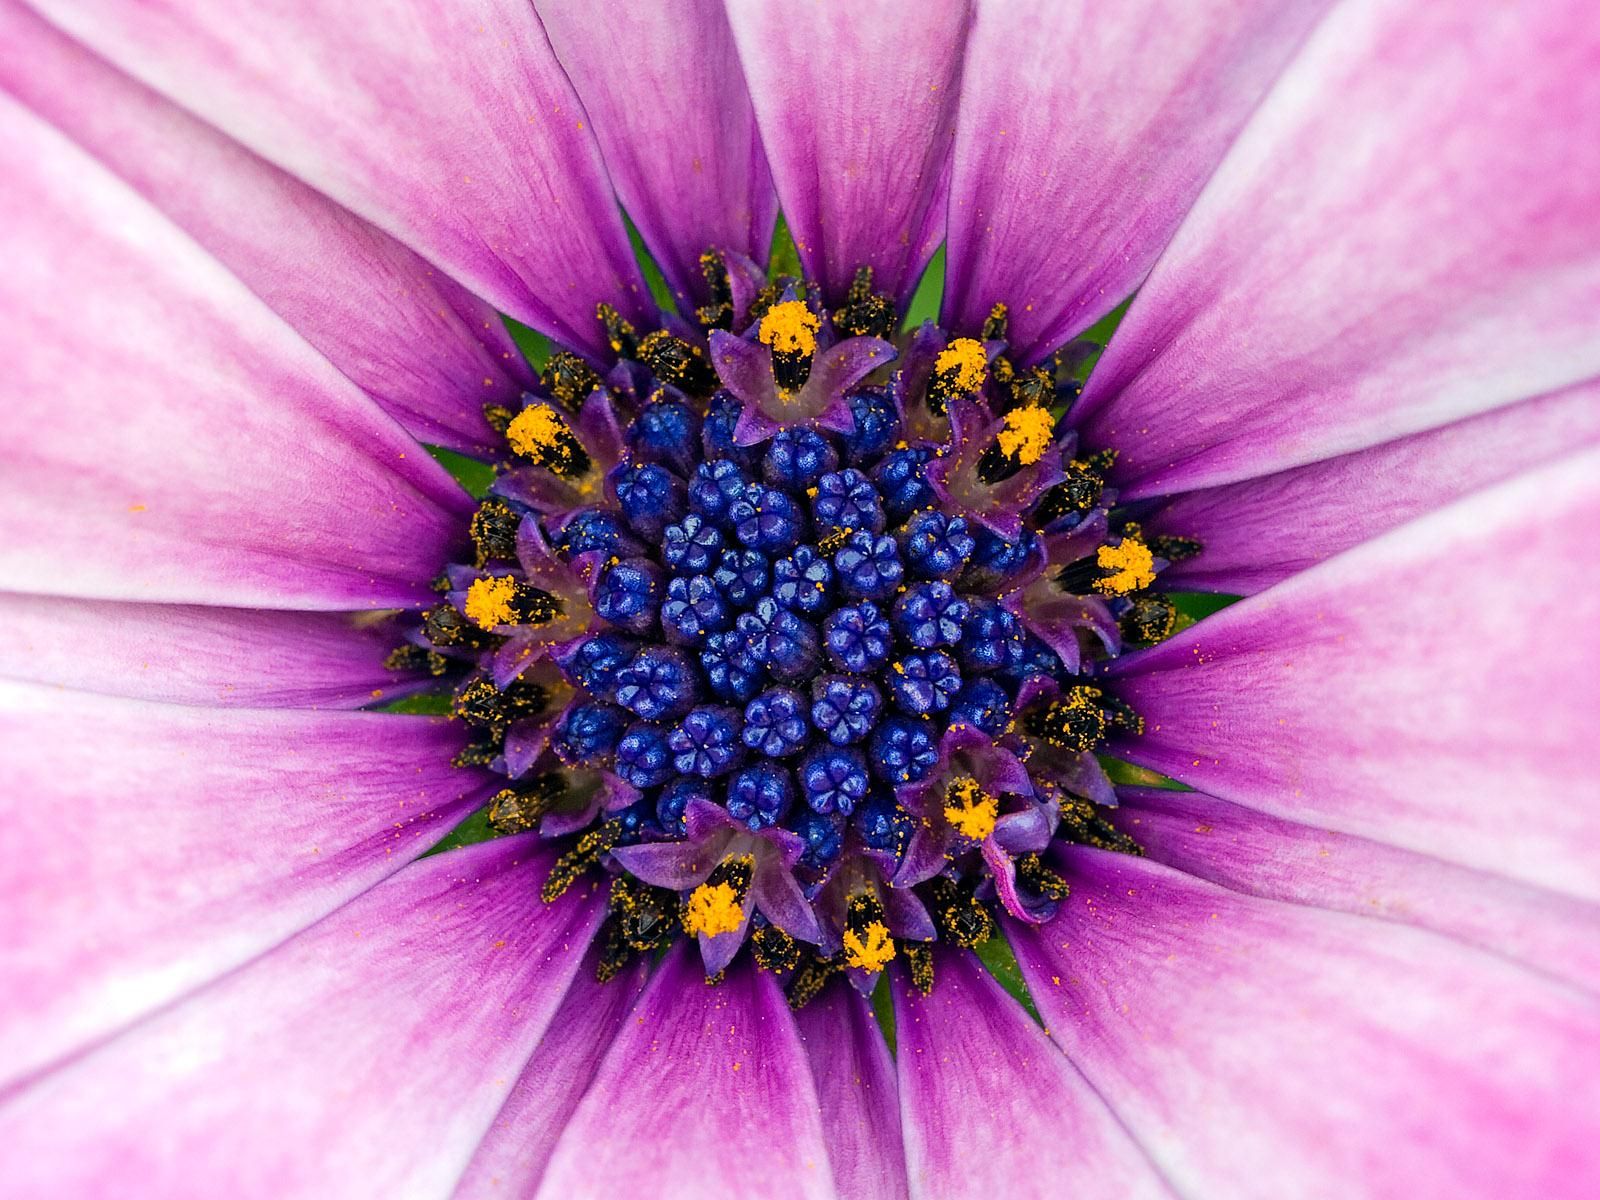 Macro flower photography - Flower Pictures | Art Subjects ...